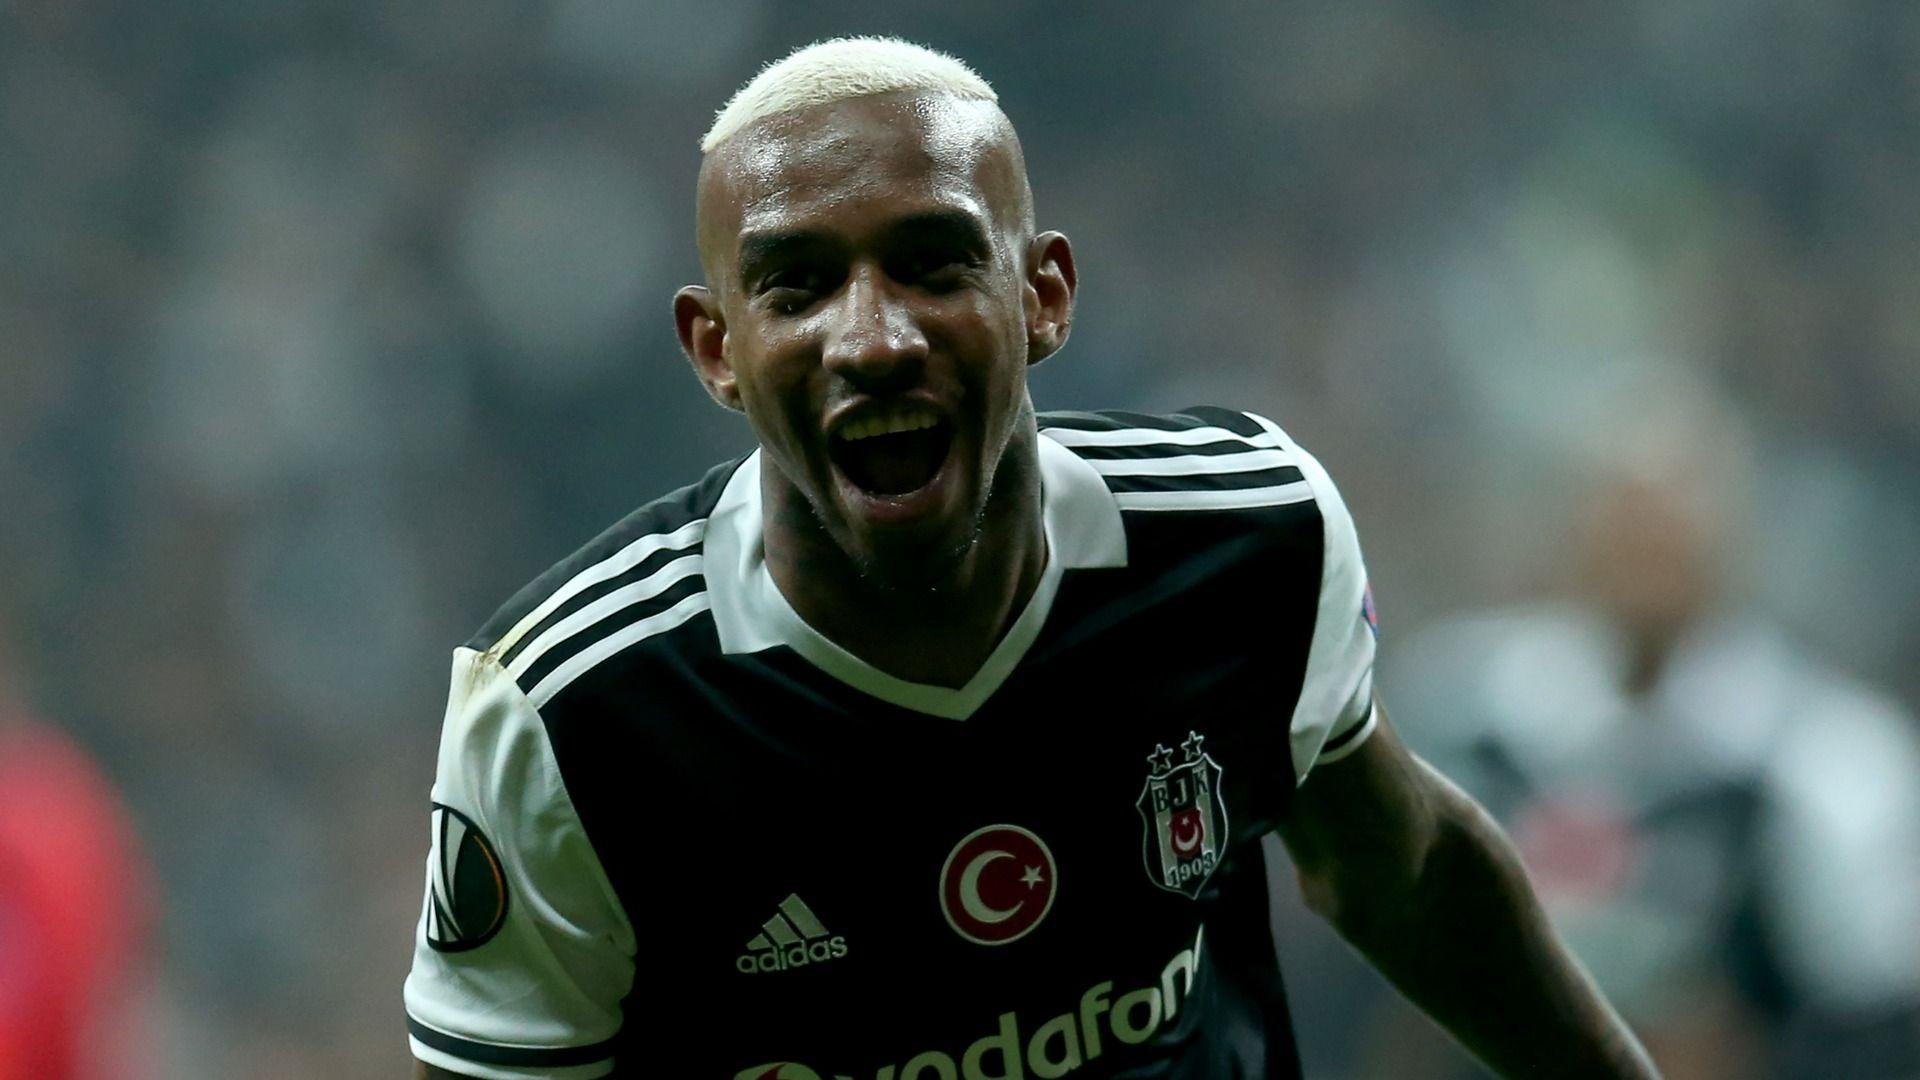 It's a dream to play for Manchester United' Talisca